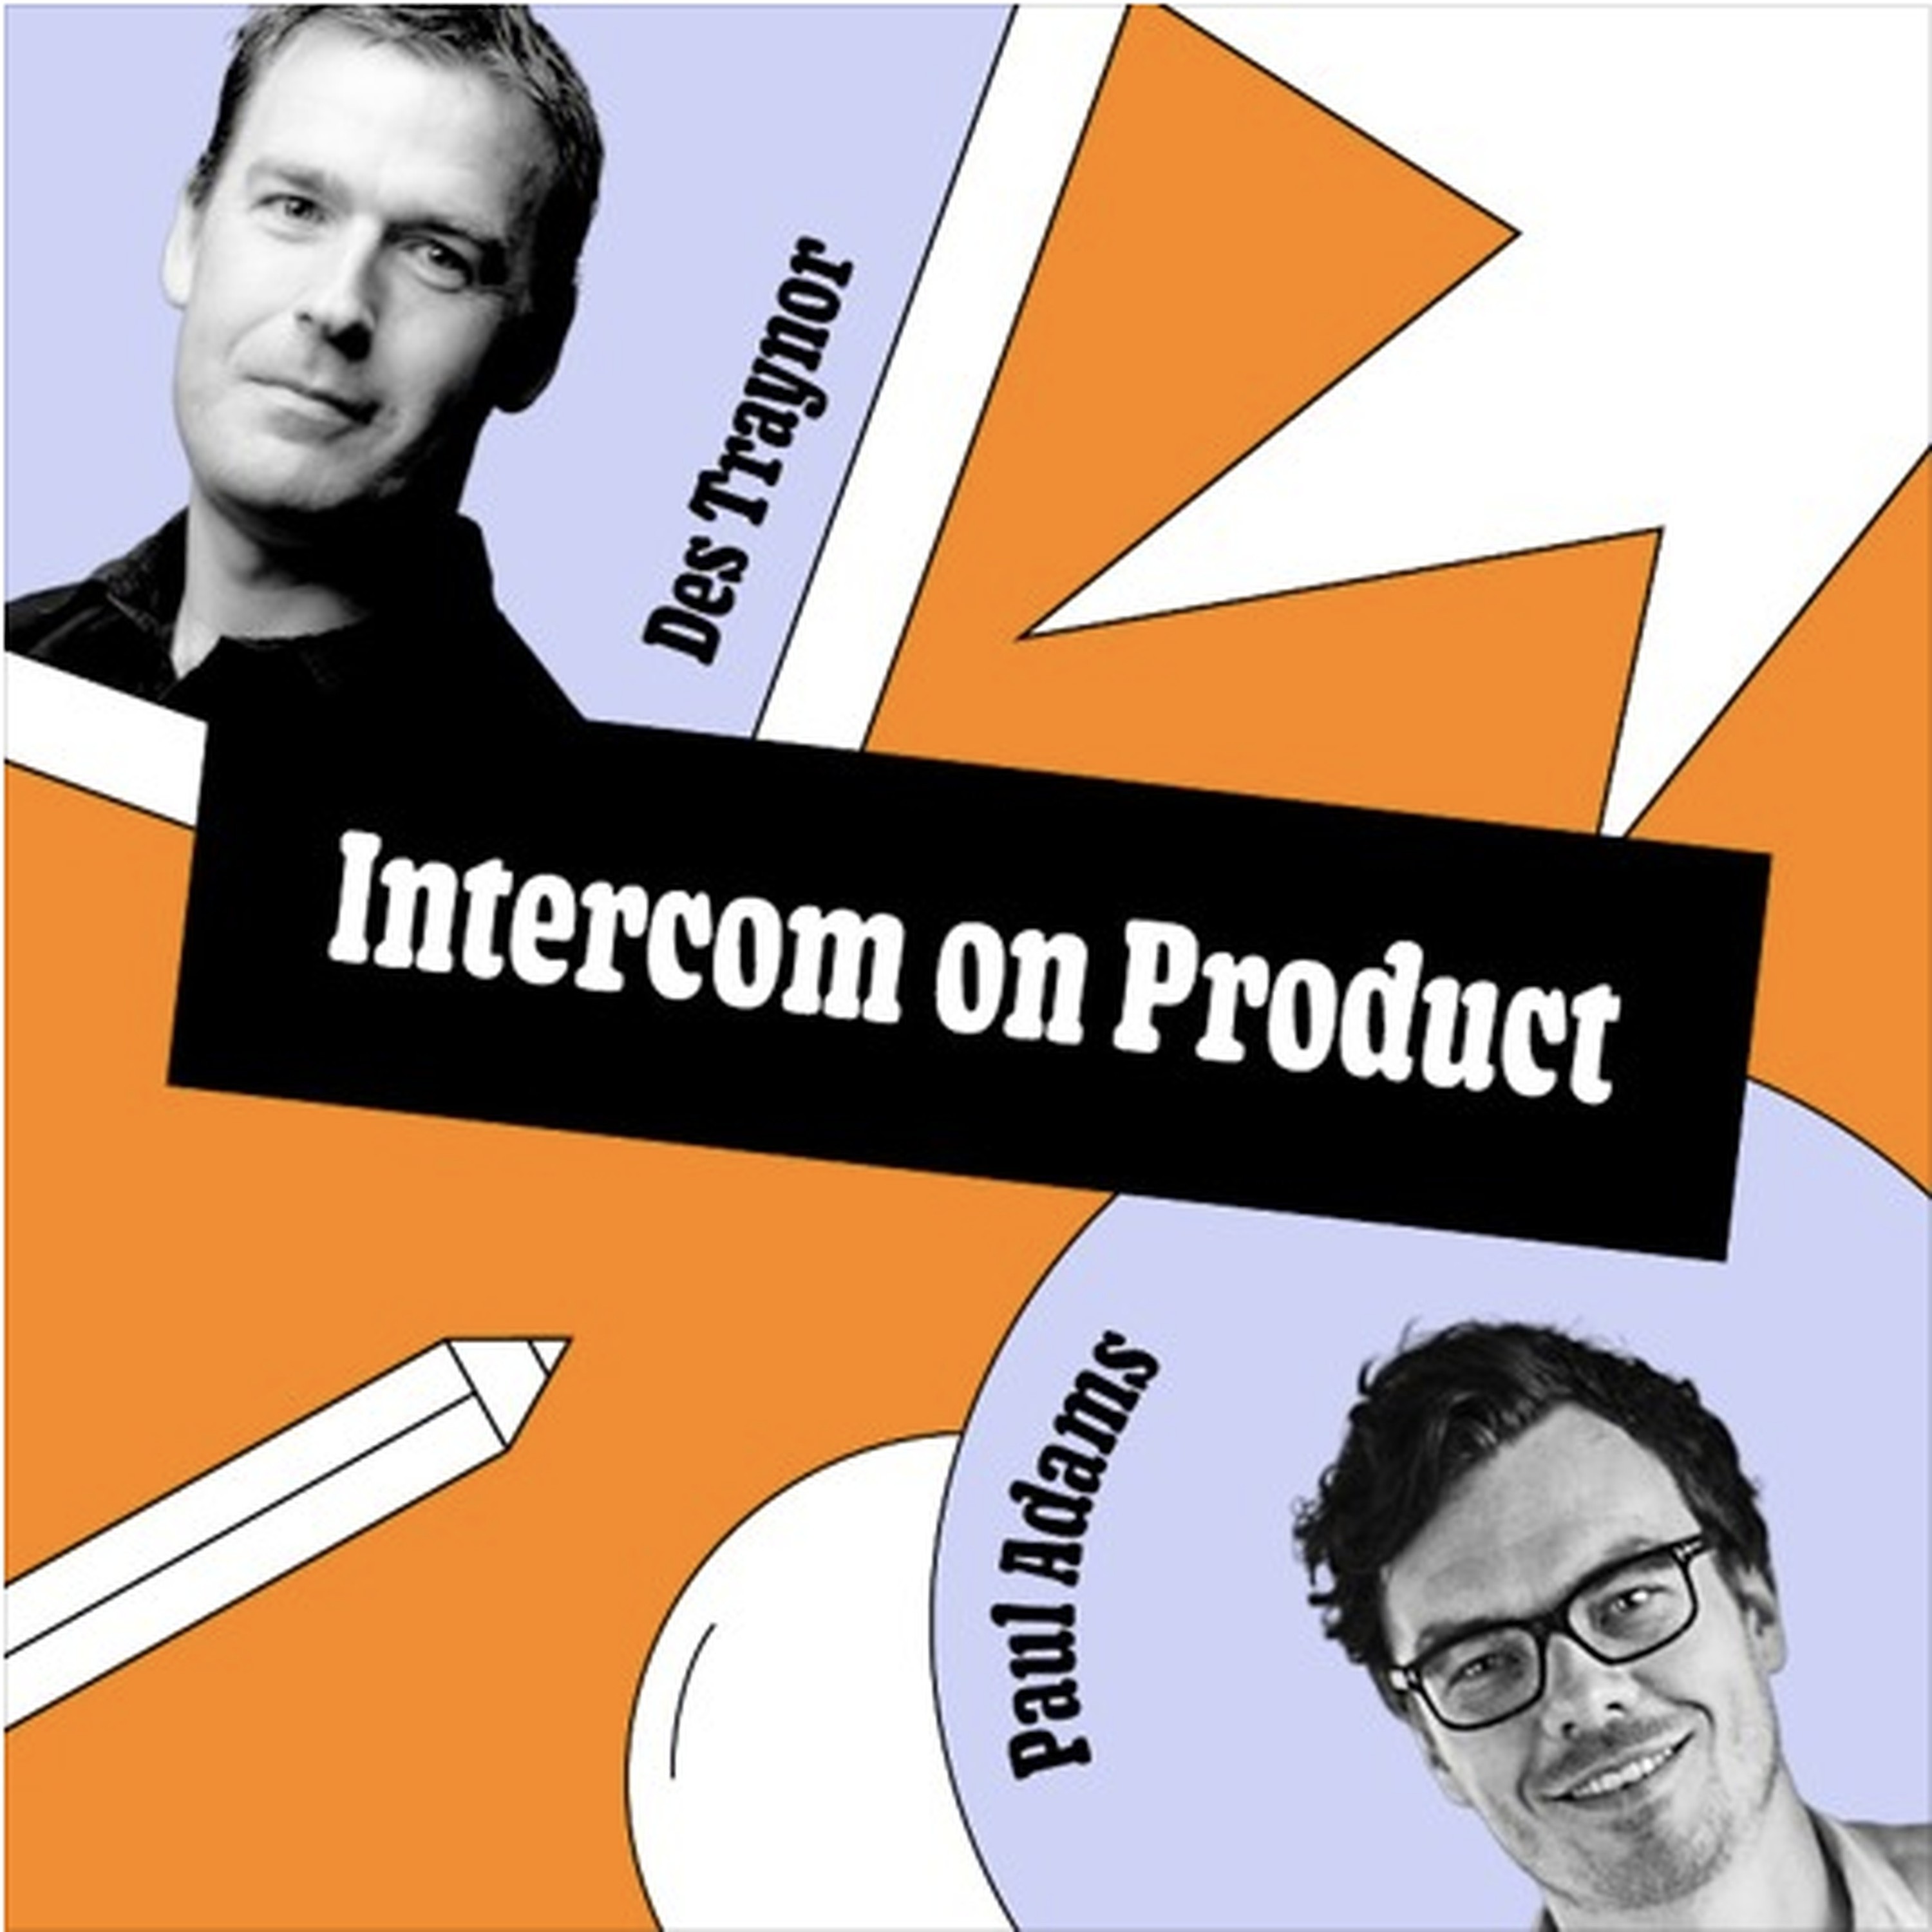 Intercom on Product: The intersection of company and product strategy